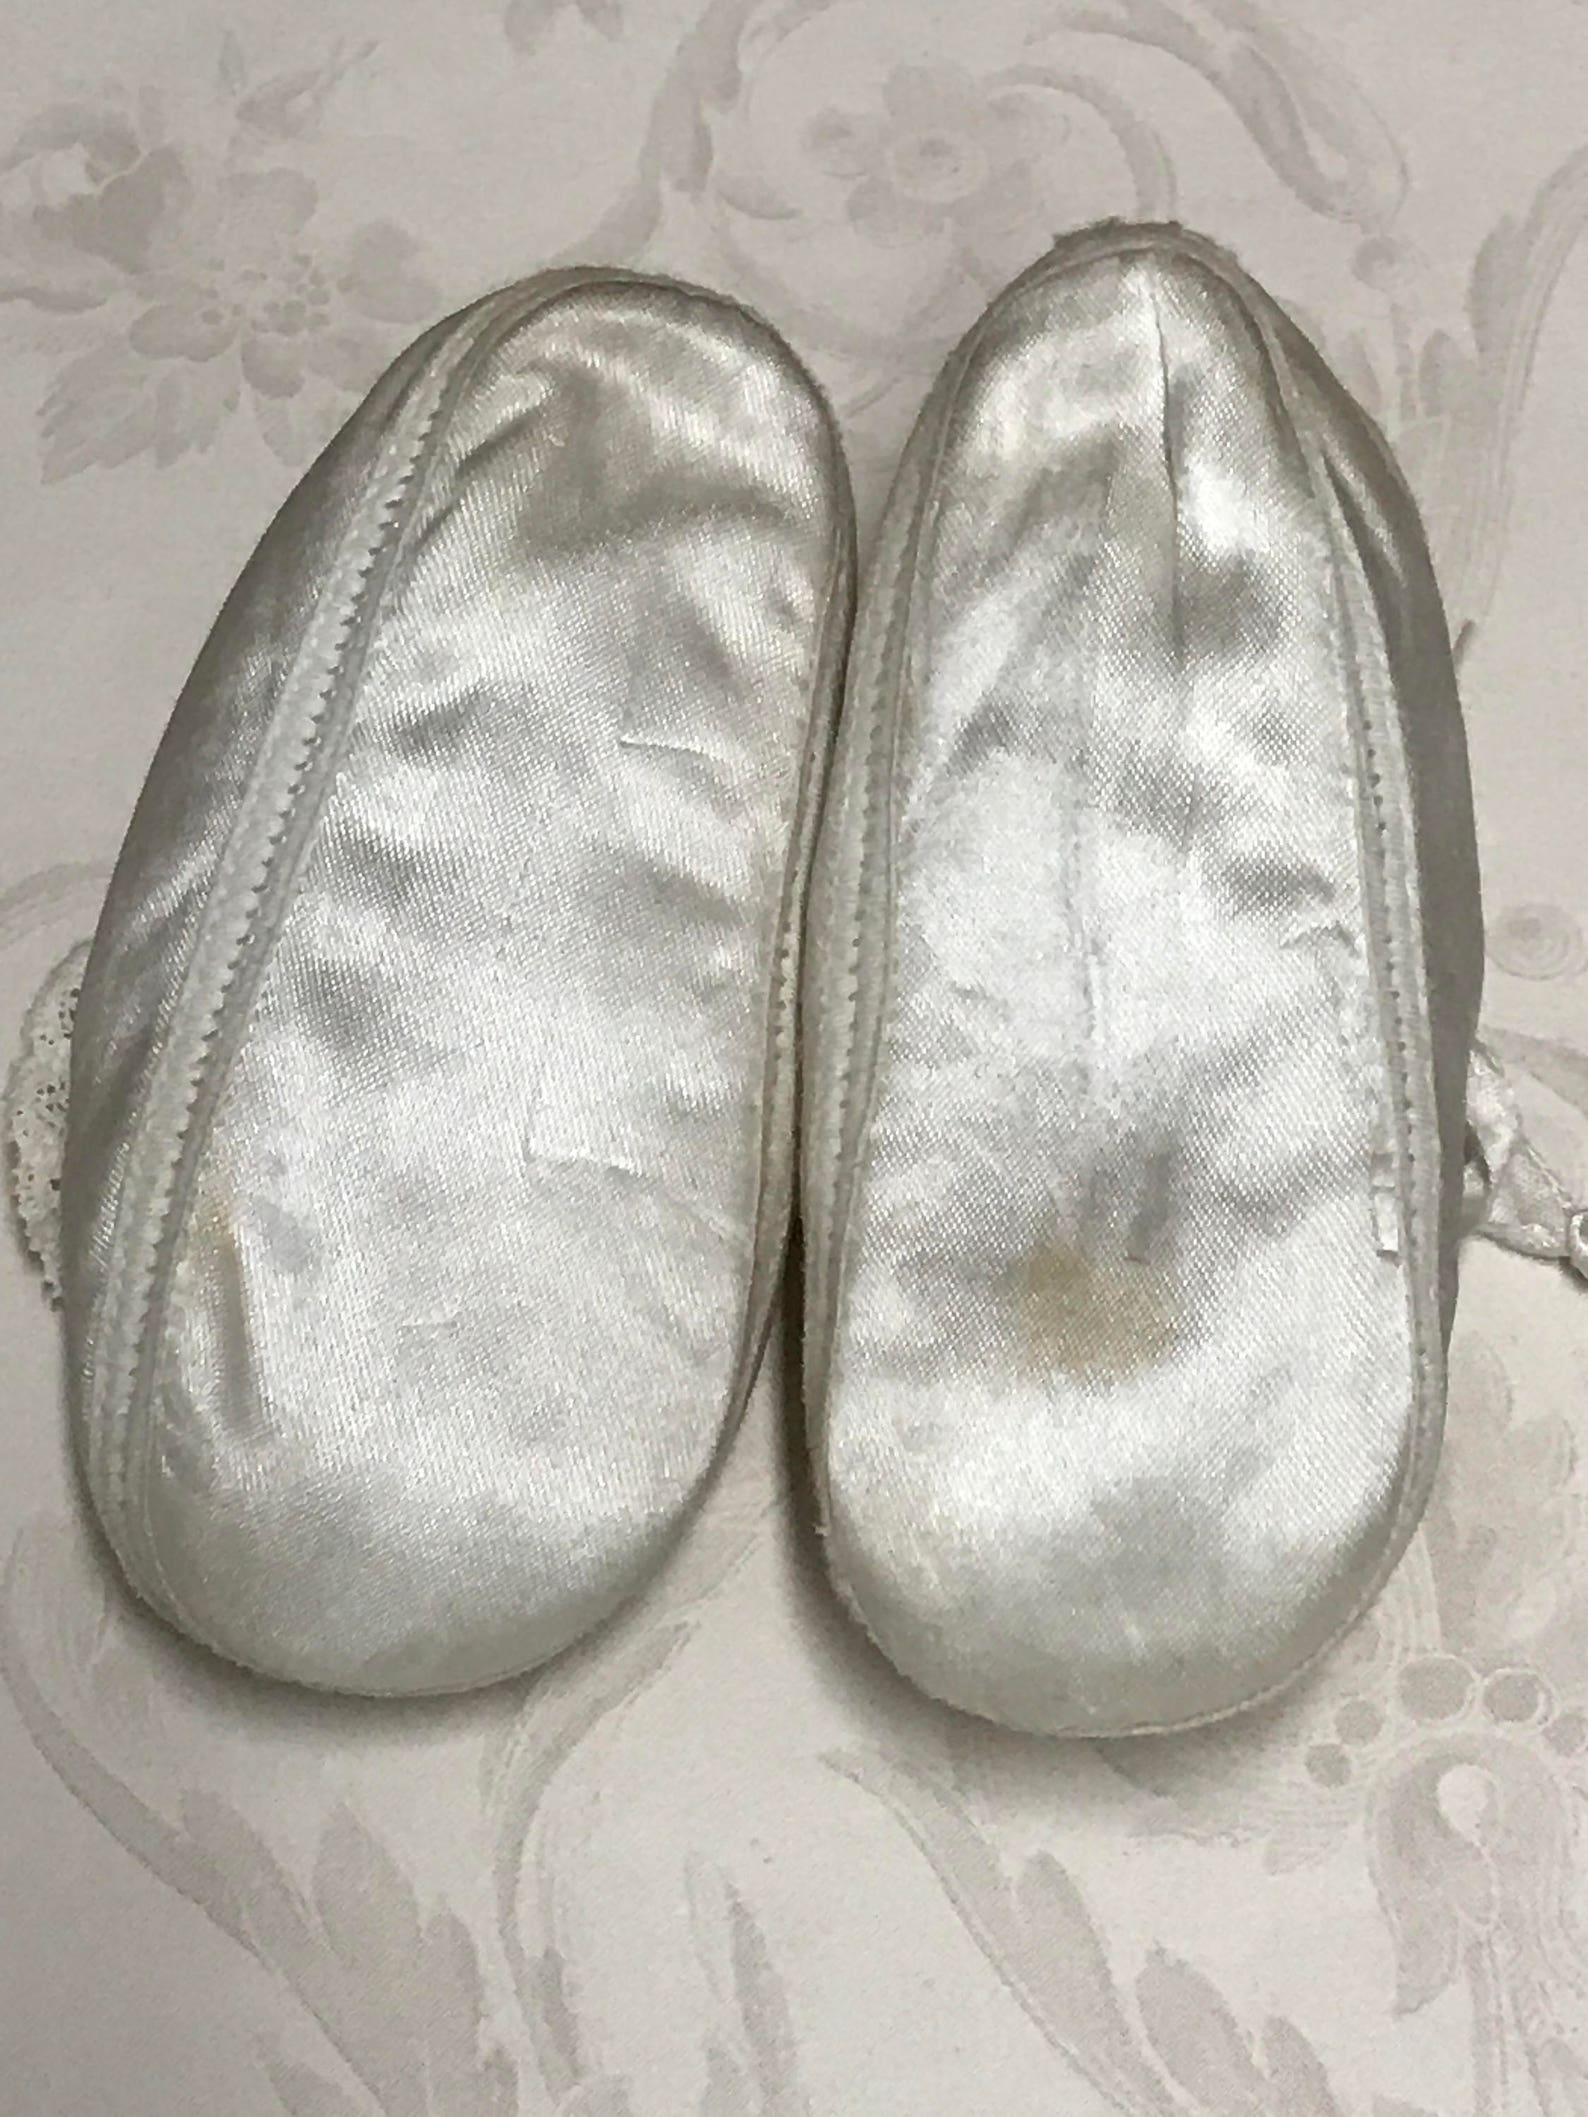 vintage baby ballet slippers, size 1, in original box, knee socks included, baby satin ballet shoes, vintage newborn shoes, mrs.